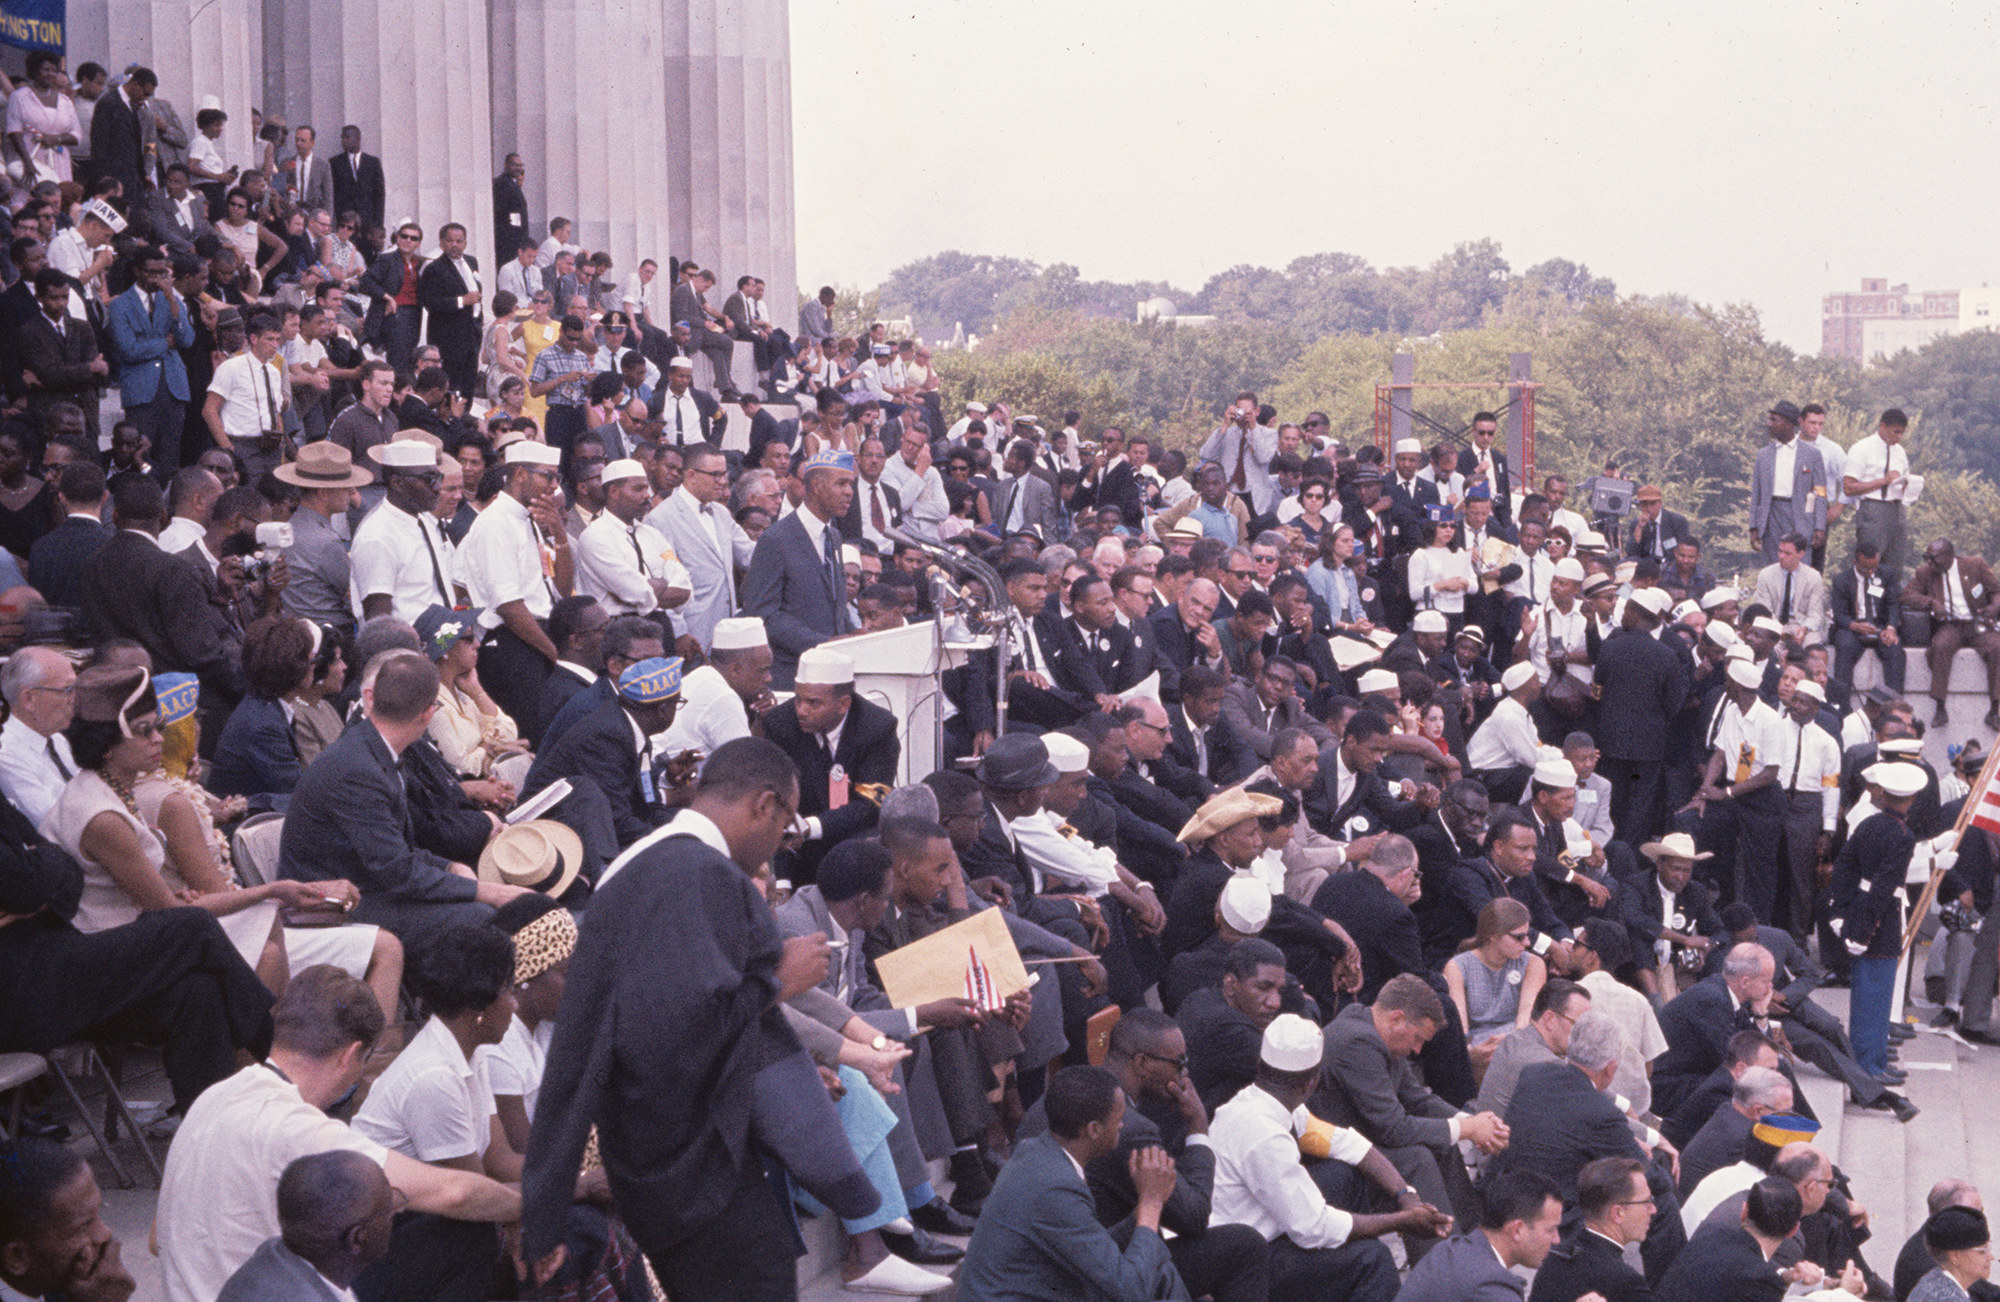 A view of the crowd on the steps of the Lincoln Memorial during the March on Washington.